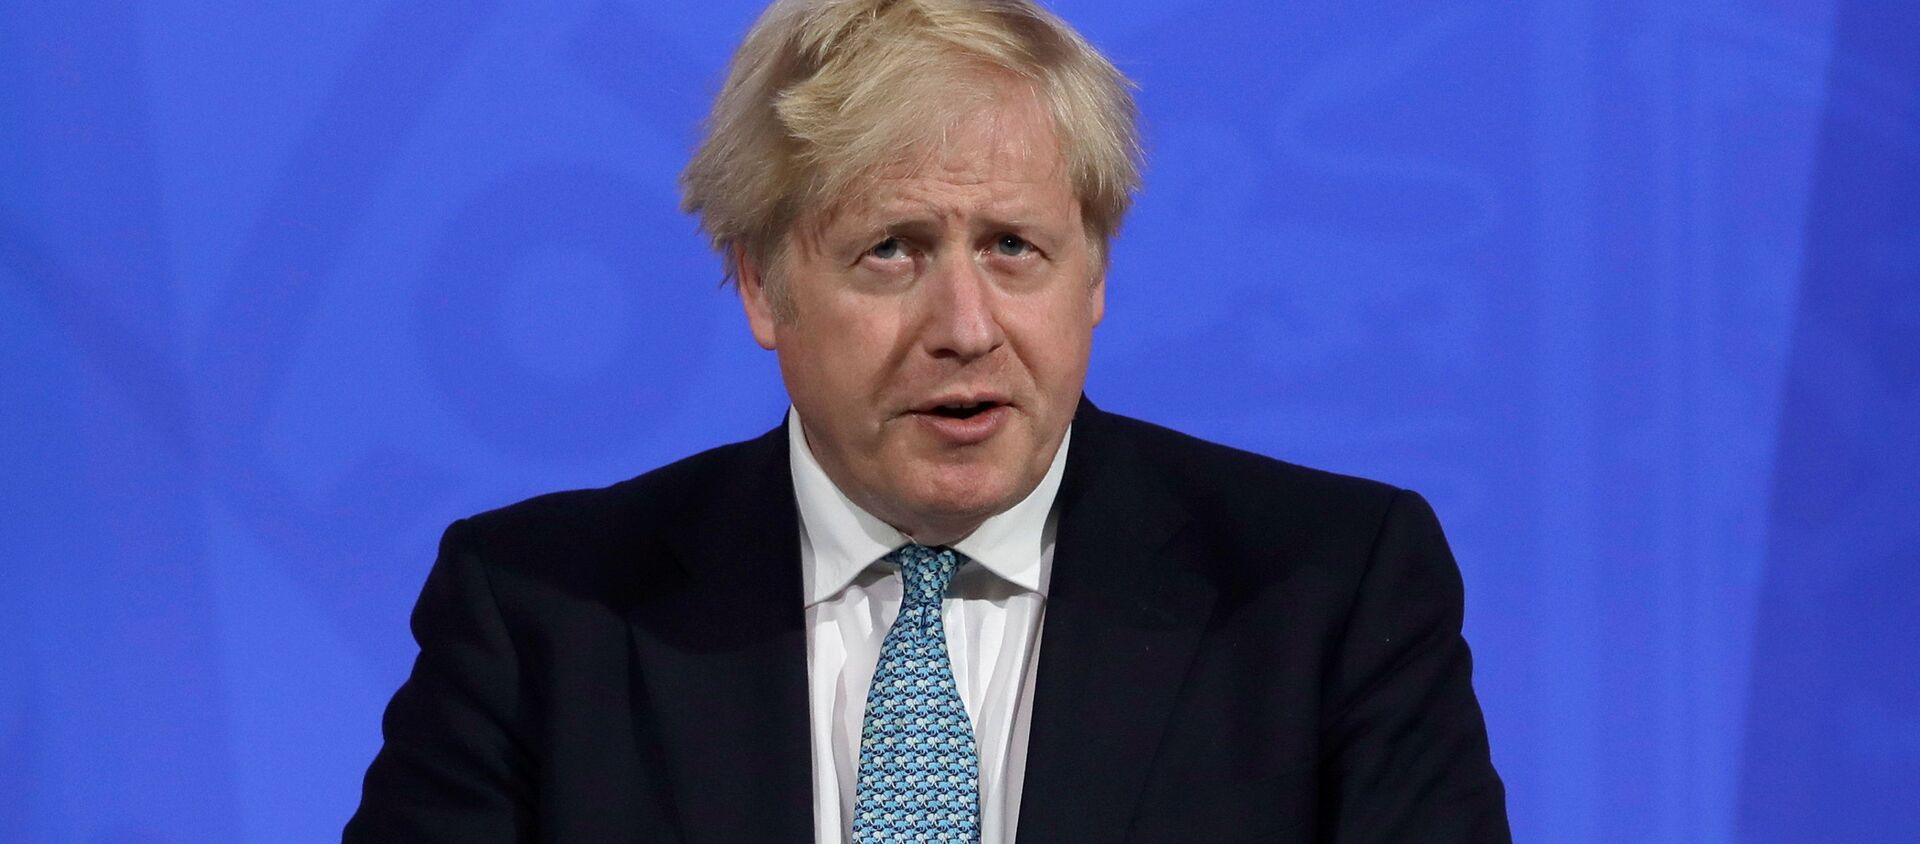 Britain's Prime Minister Boris Johnson speaks at a news conference about the ongoing coronavirus disease (COVID-19) outbreak, in London, Britain May 14, 2021 - Sputnik International, 1920